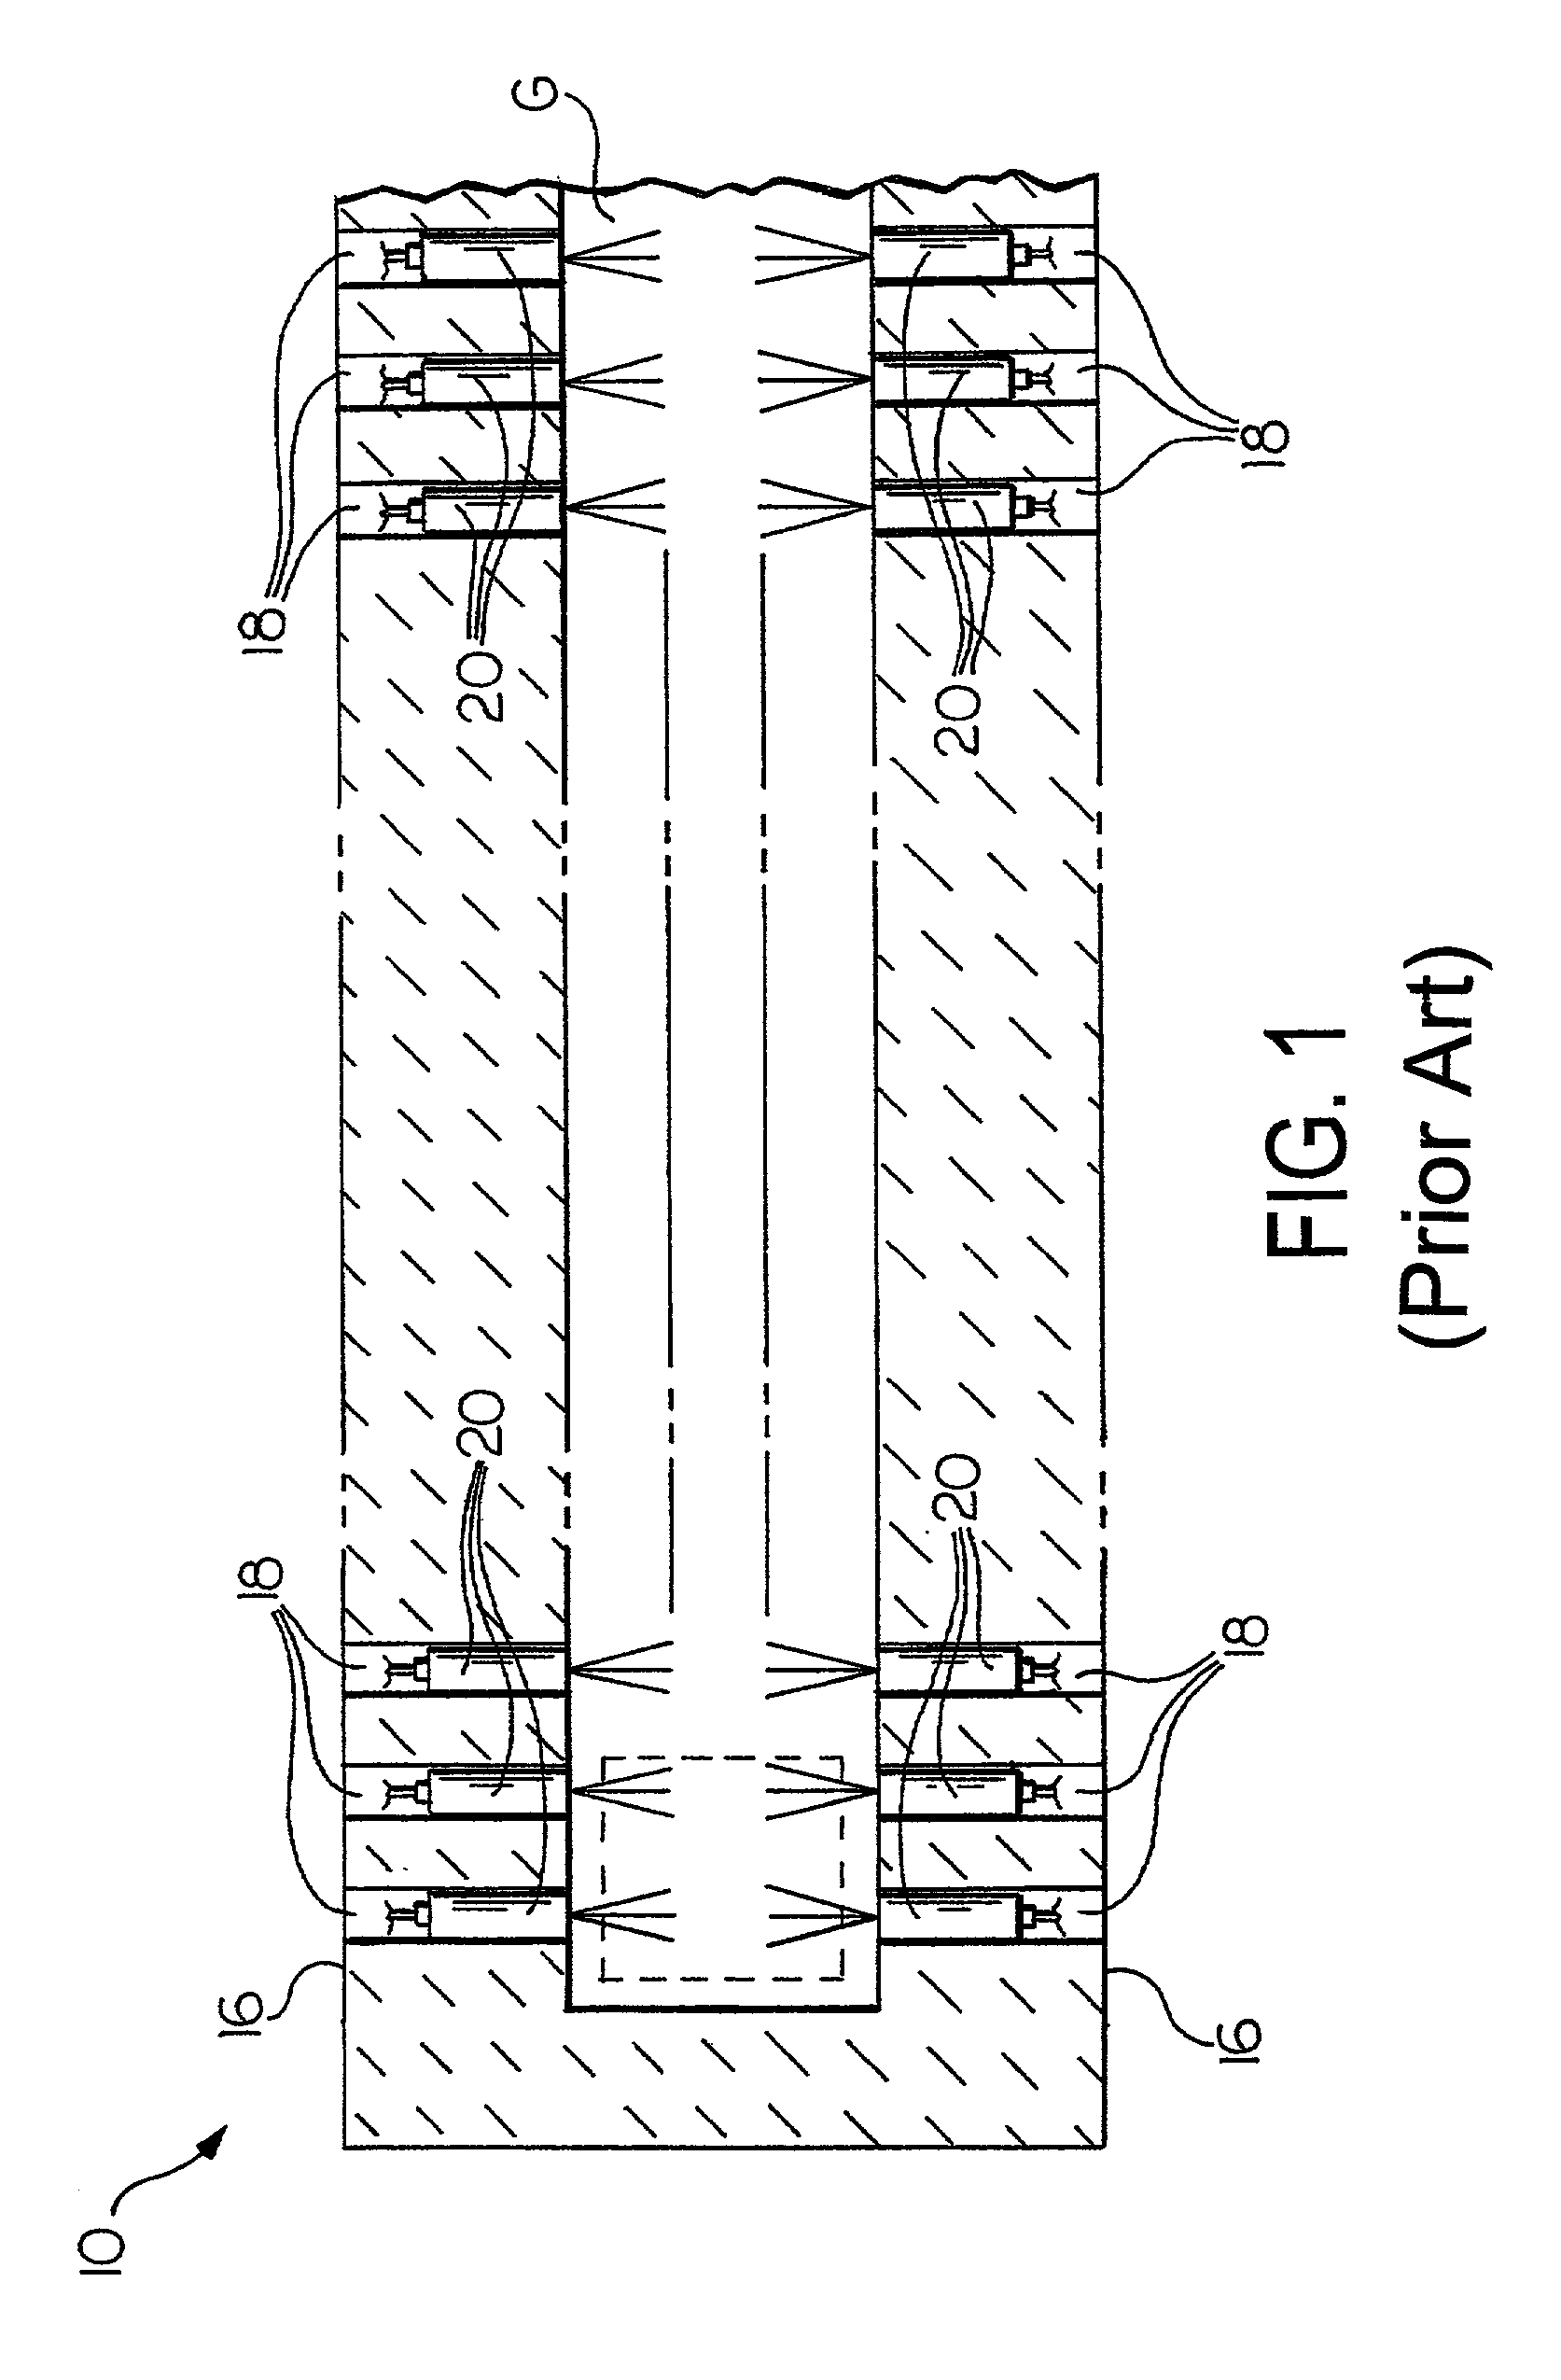 Oxygen-fired front end for glass forming operation